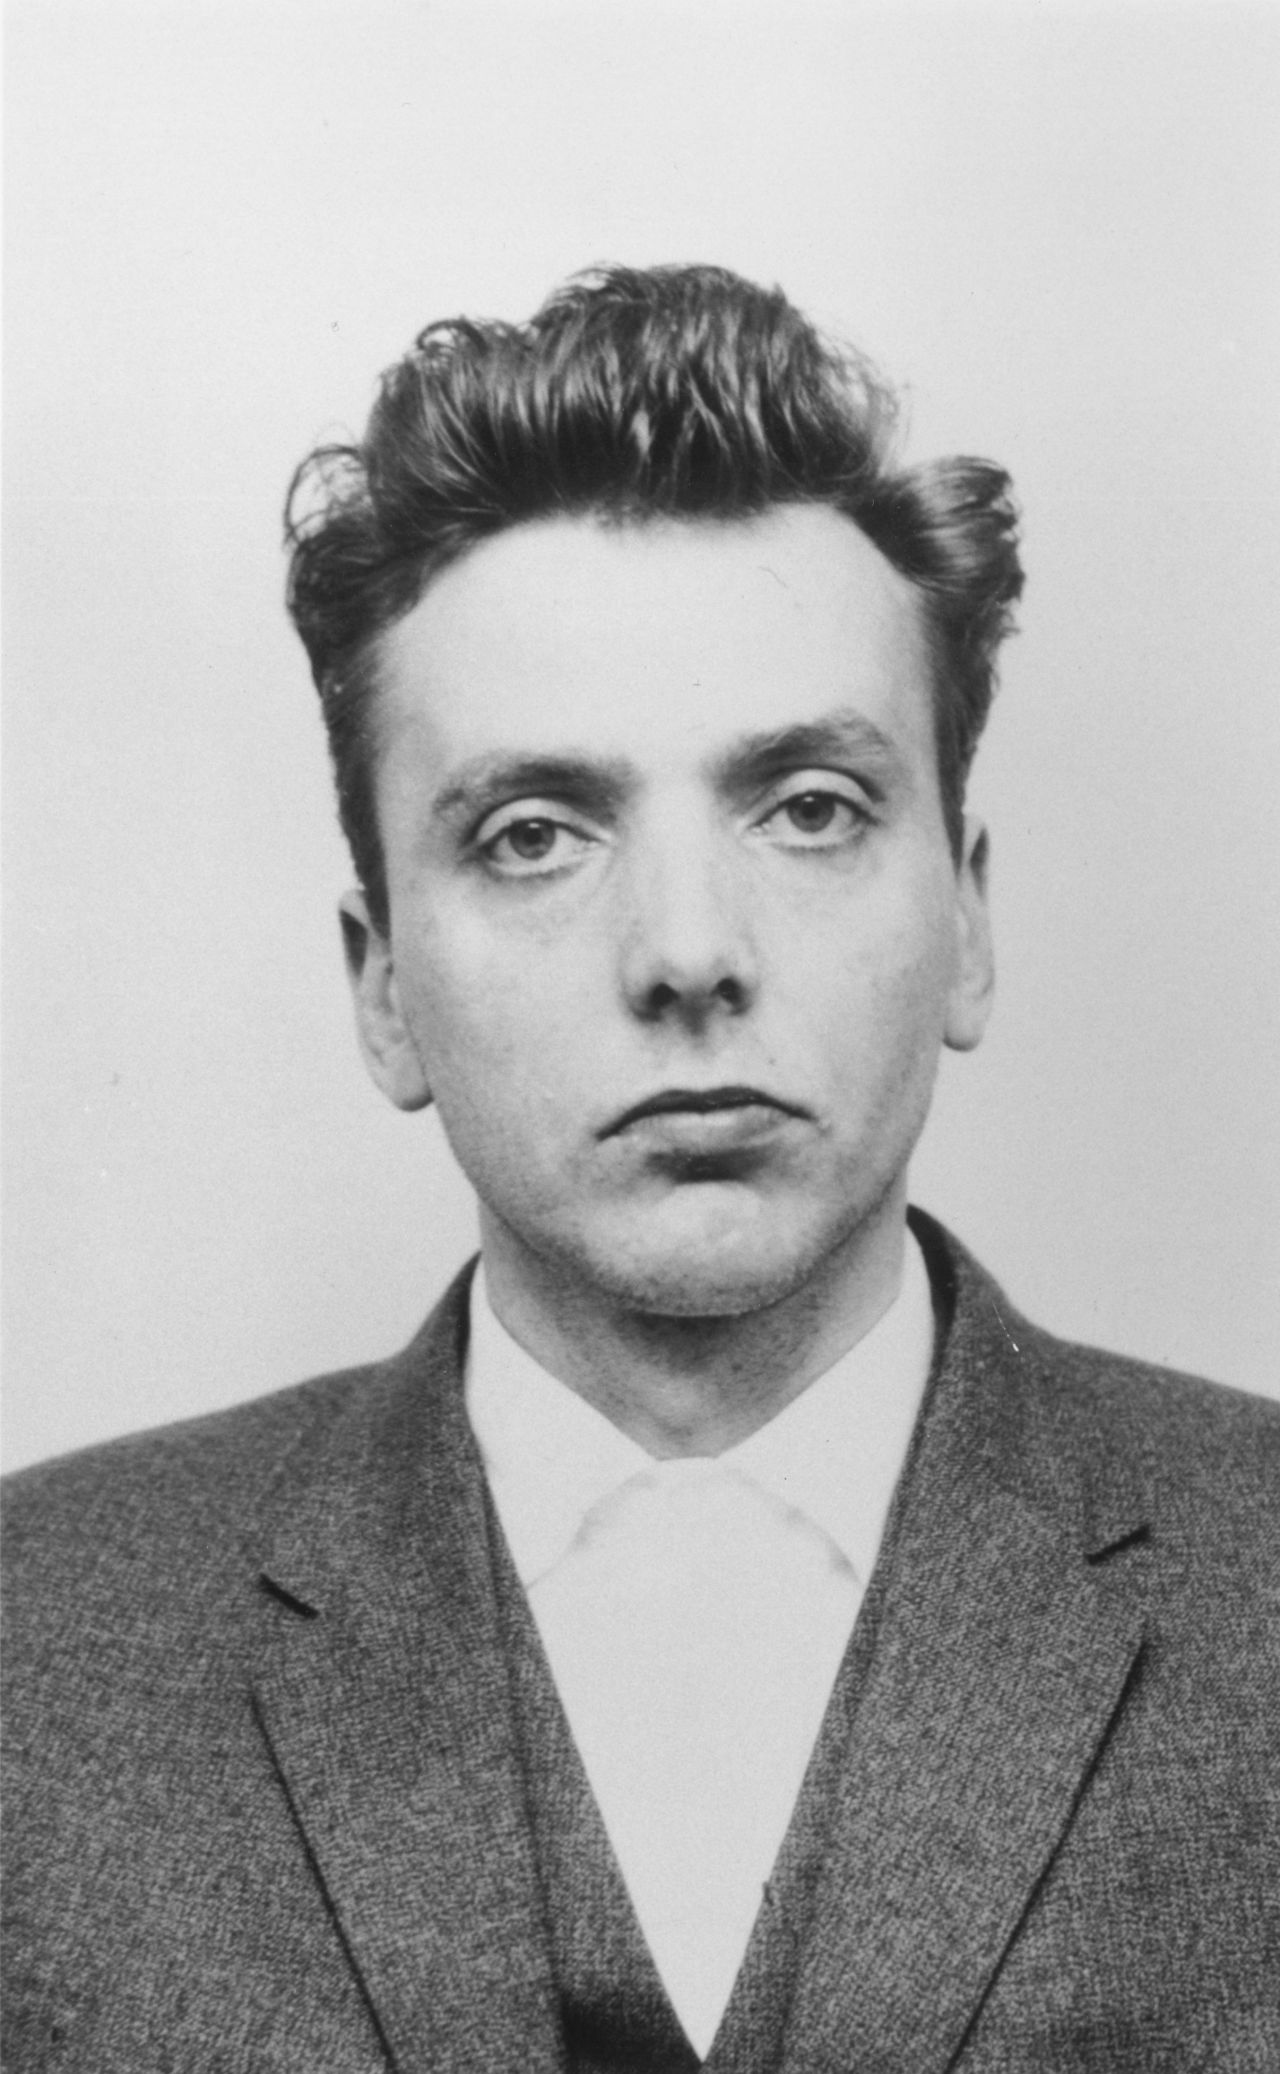 Ian Brady was sentenced to life imprisonment on 6 May 1966 for the murders of Edward Evans, Lesley Ann Downey and 12-year-old John Kilbride. 